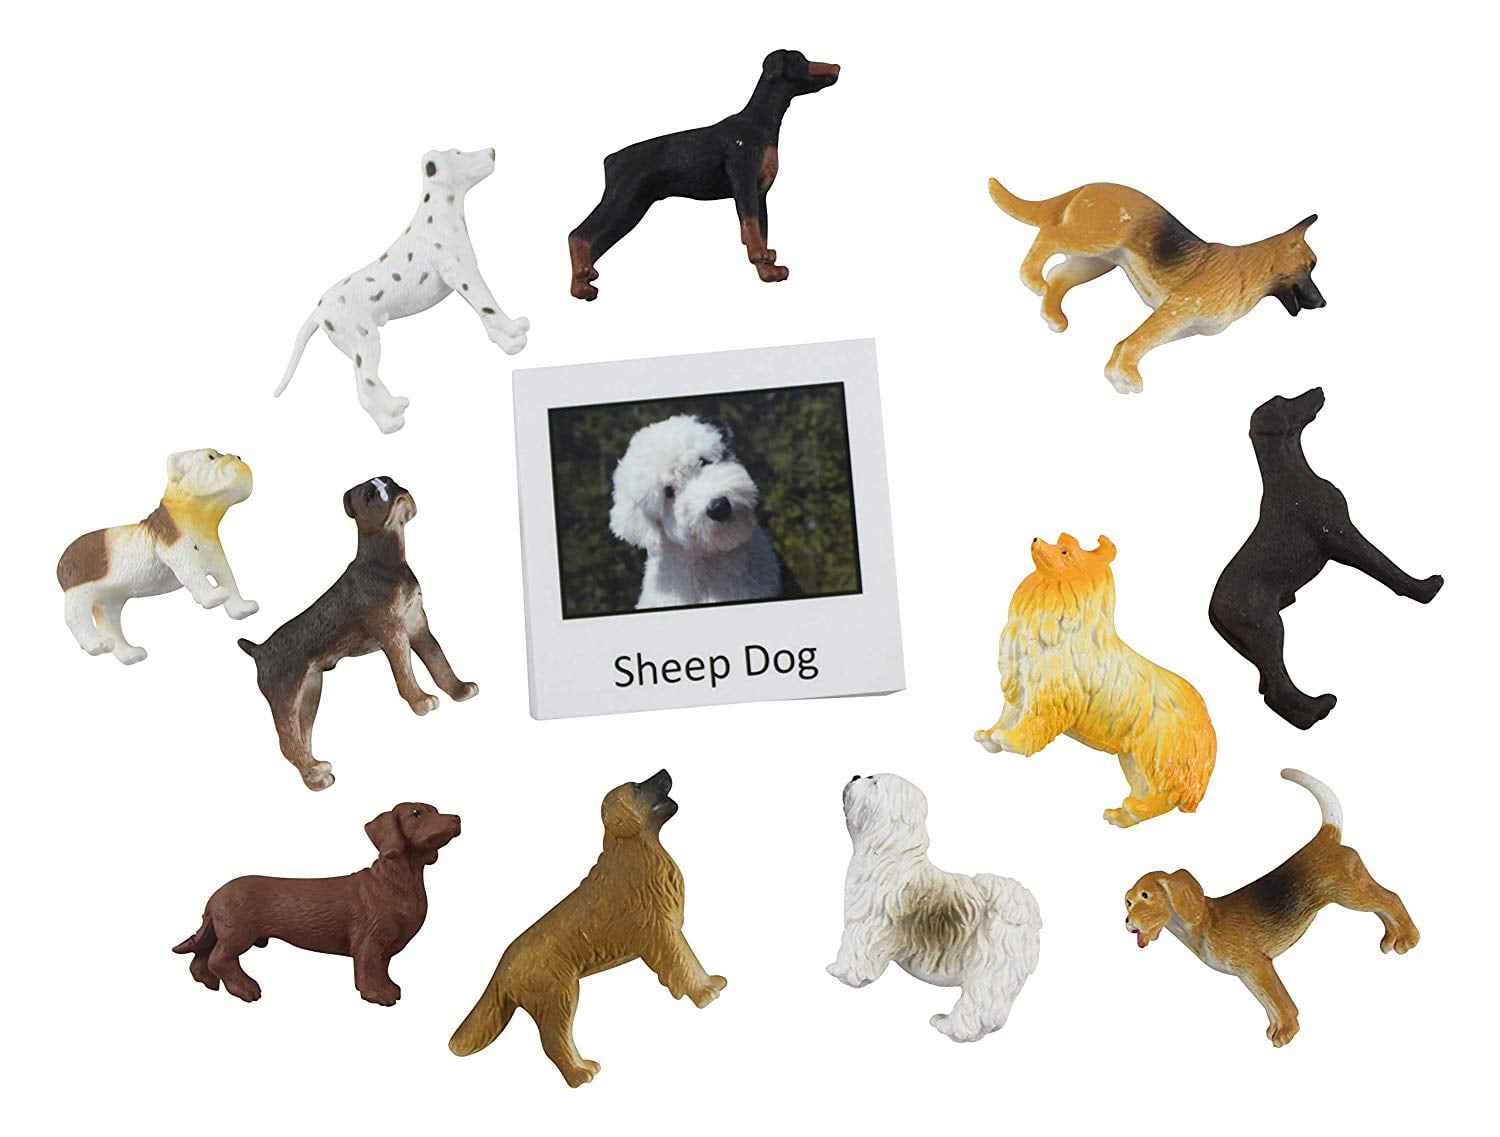 Bergsma Gallery Press :: Products :: Mailable Mini's :: Pets & Zoo Animals  :: Dogs / It's A Doggy Dog World - Mailable Mini